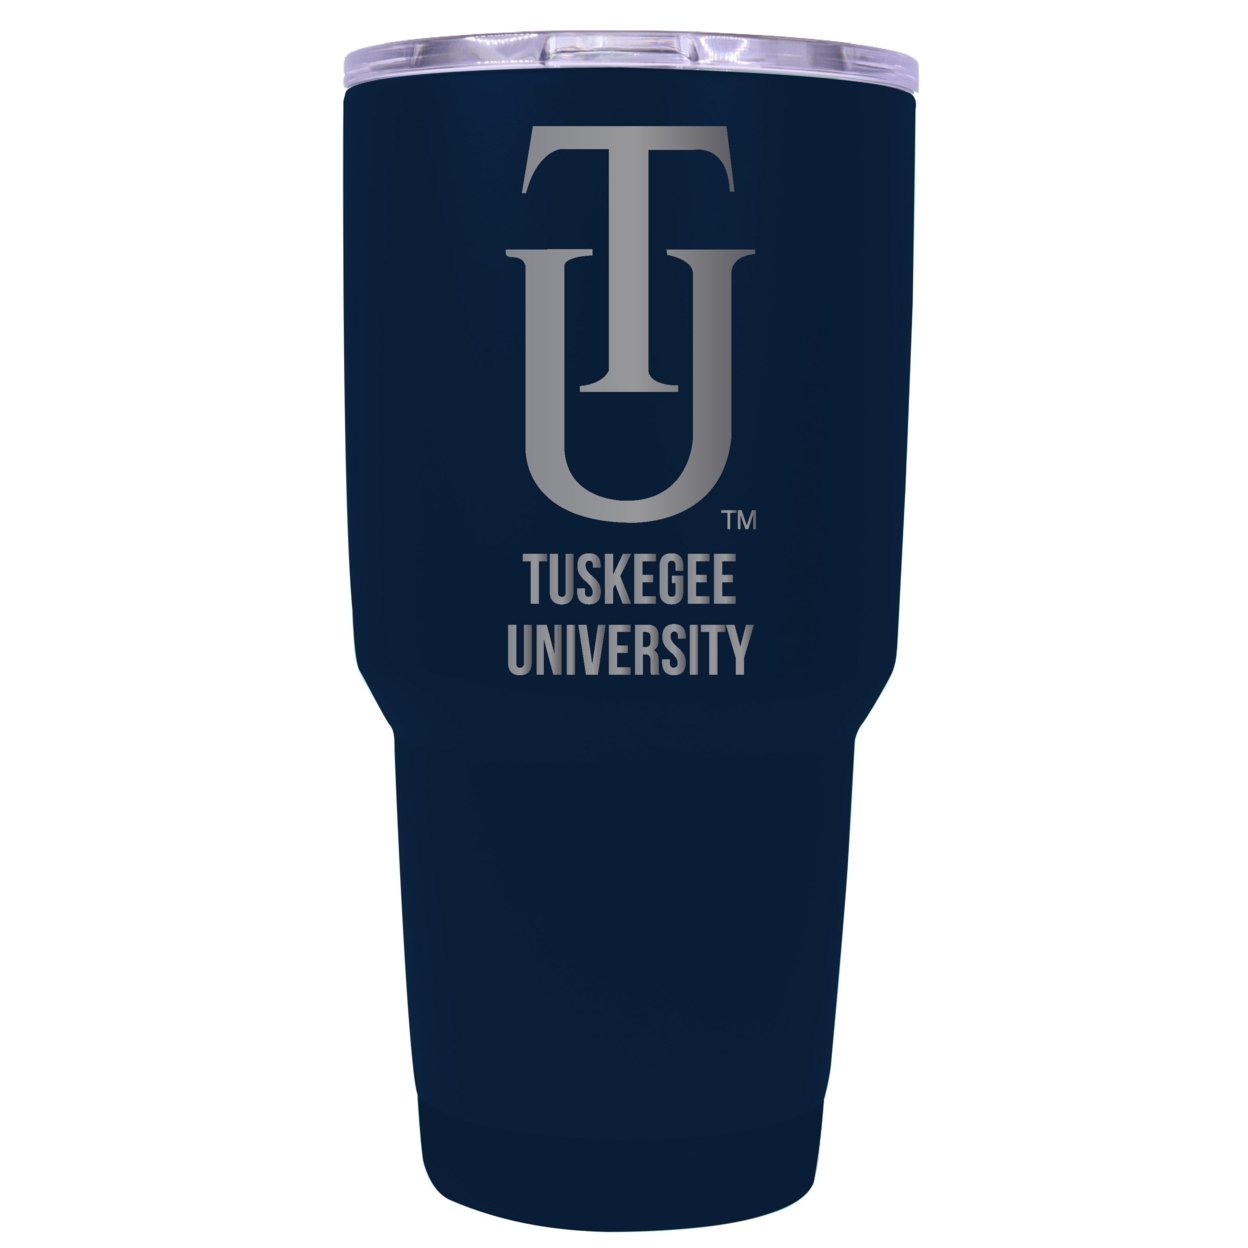 Tuskegee University 24 Oz Laser Engraved Stainless Steel Insulated Tumbler - Choose Your Color. - Red